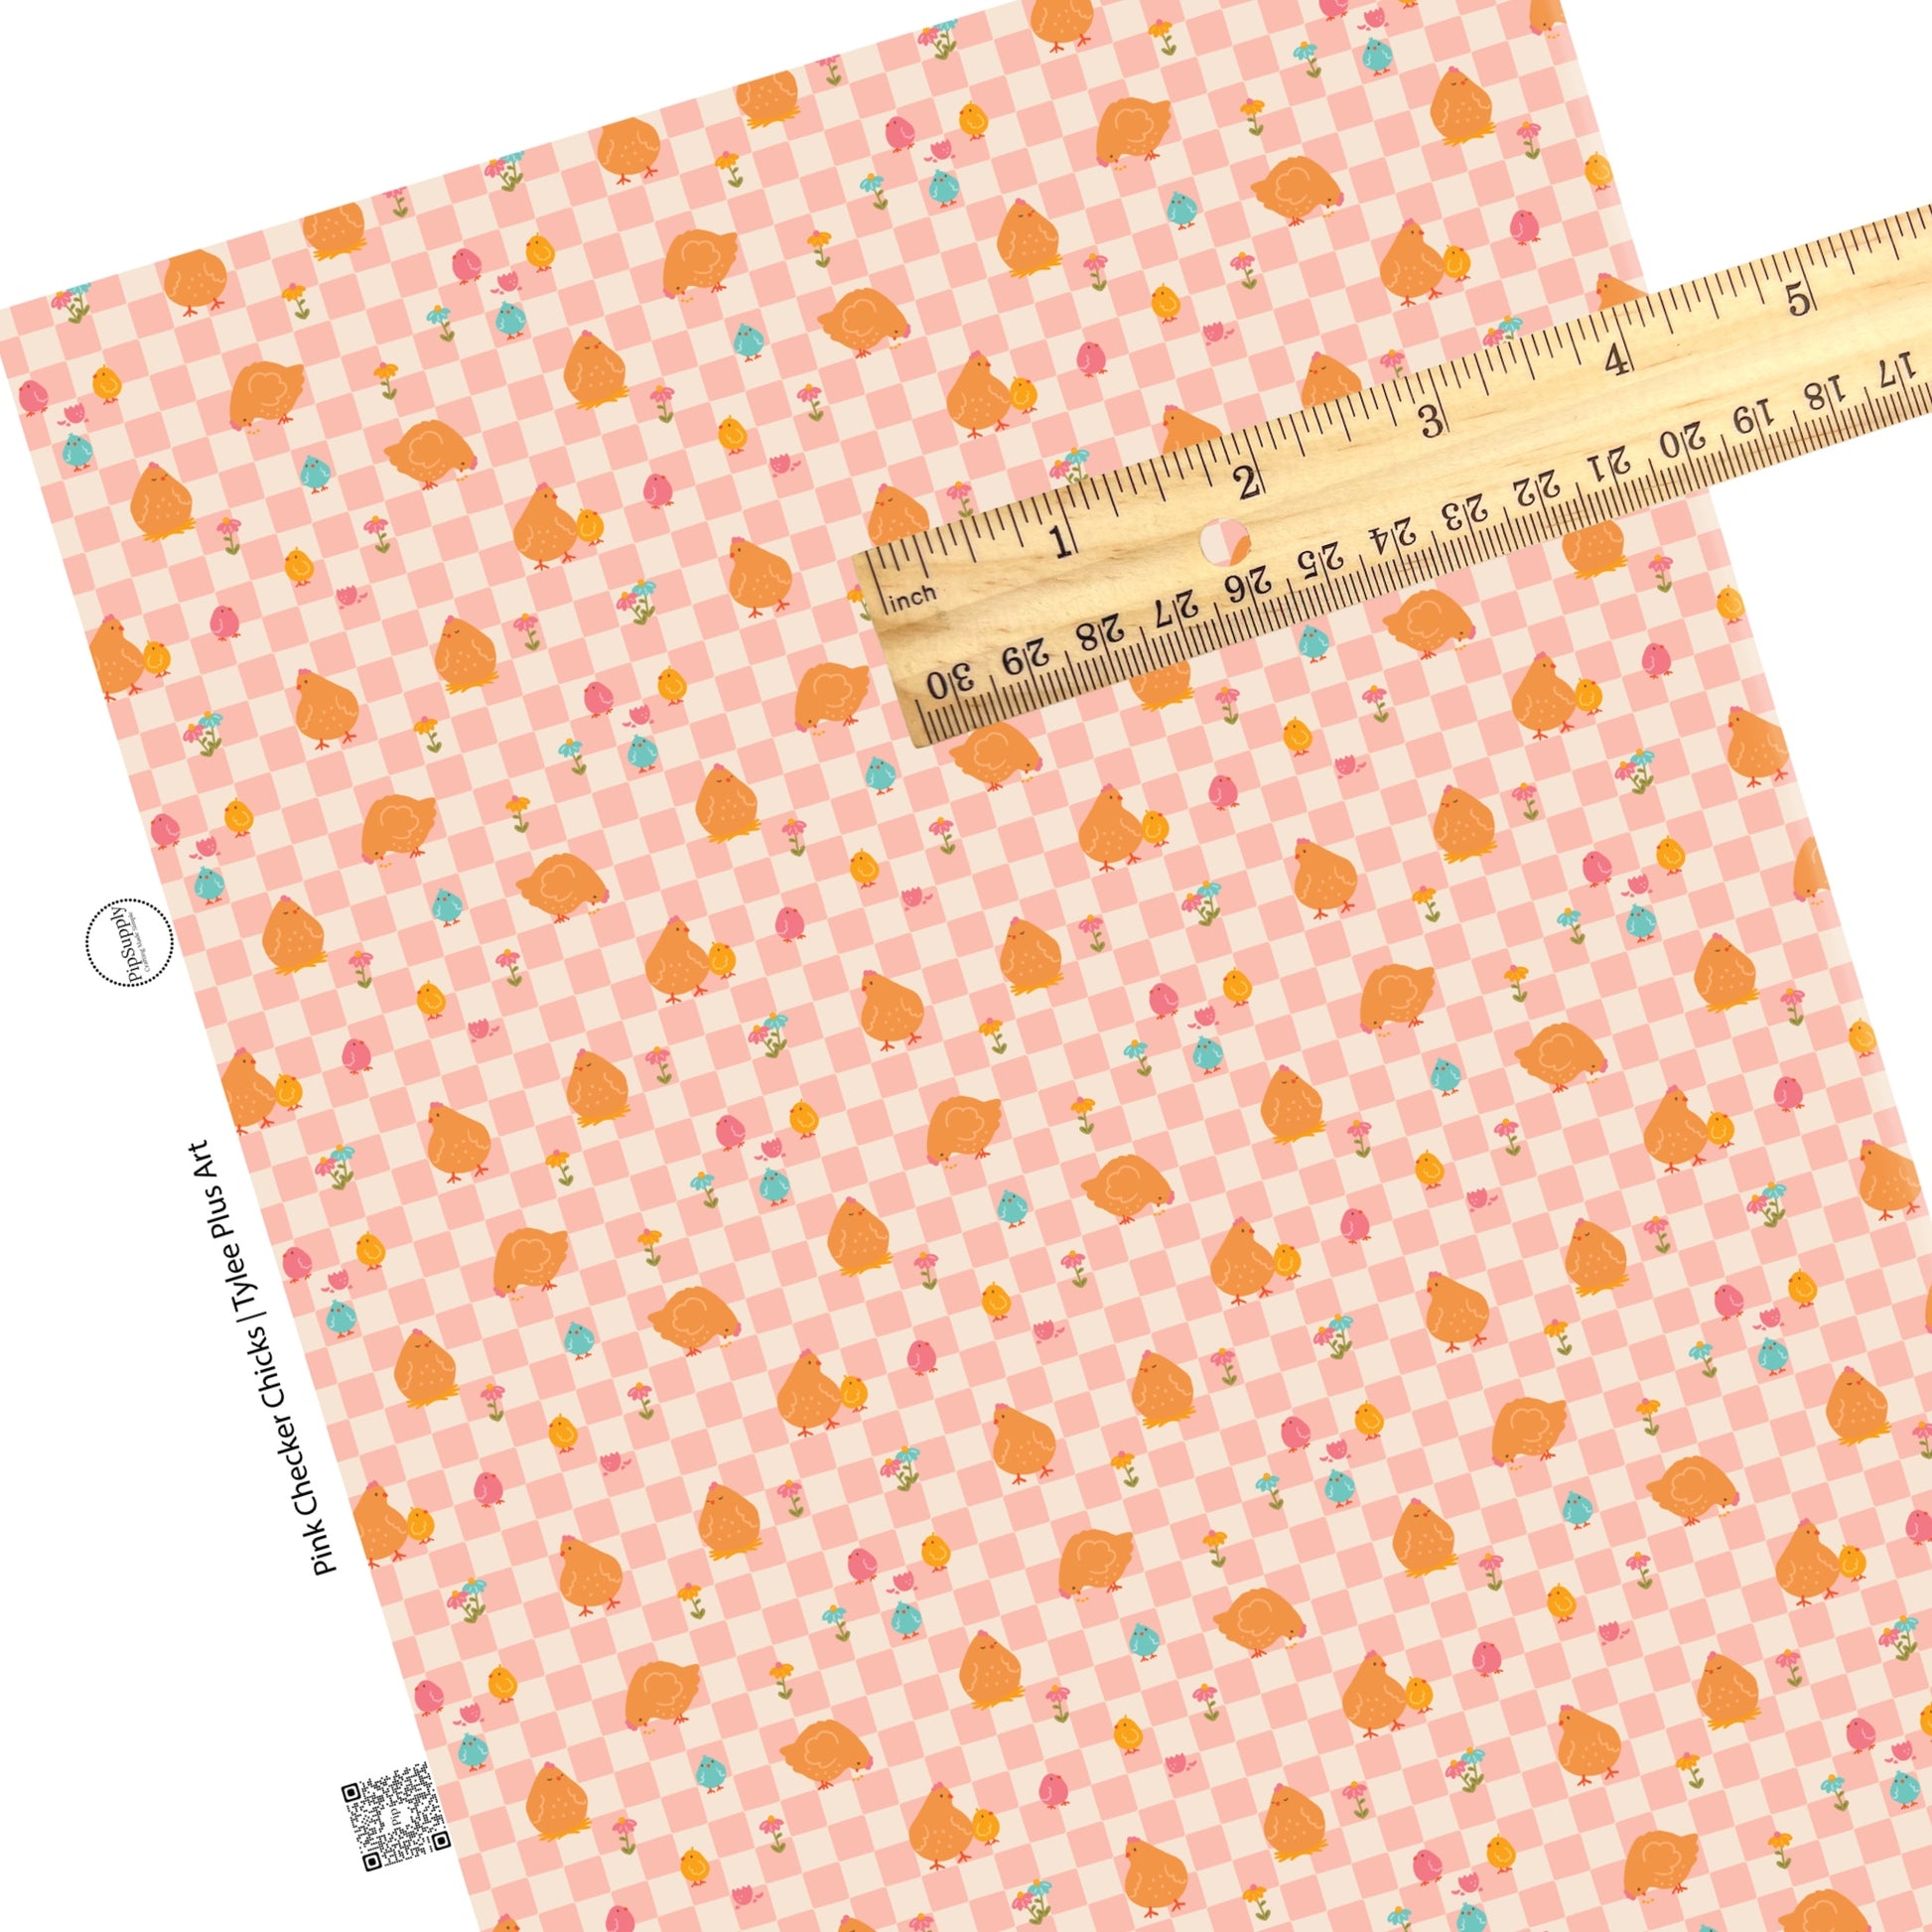 These pastel checkered pattern faux leather sheets contain the following design elements: baby chicks and tiny flowers on light pink and cream checkered pattern. Our CPSIA compliant faux leather sheets or rolls can be used for all types of crafting projects. 